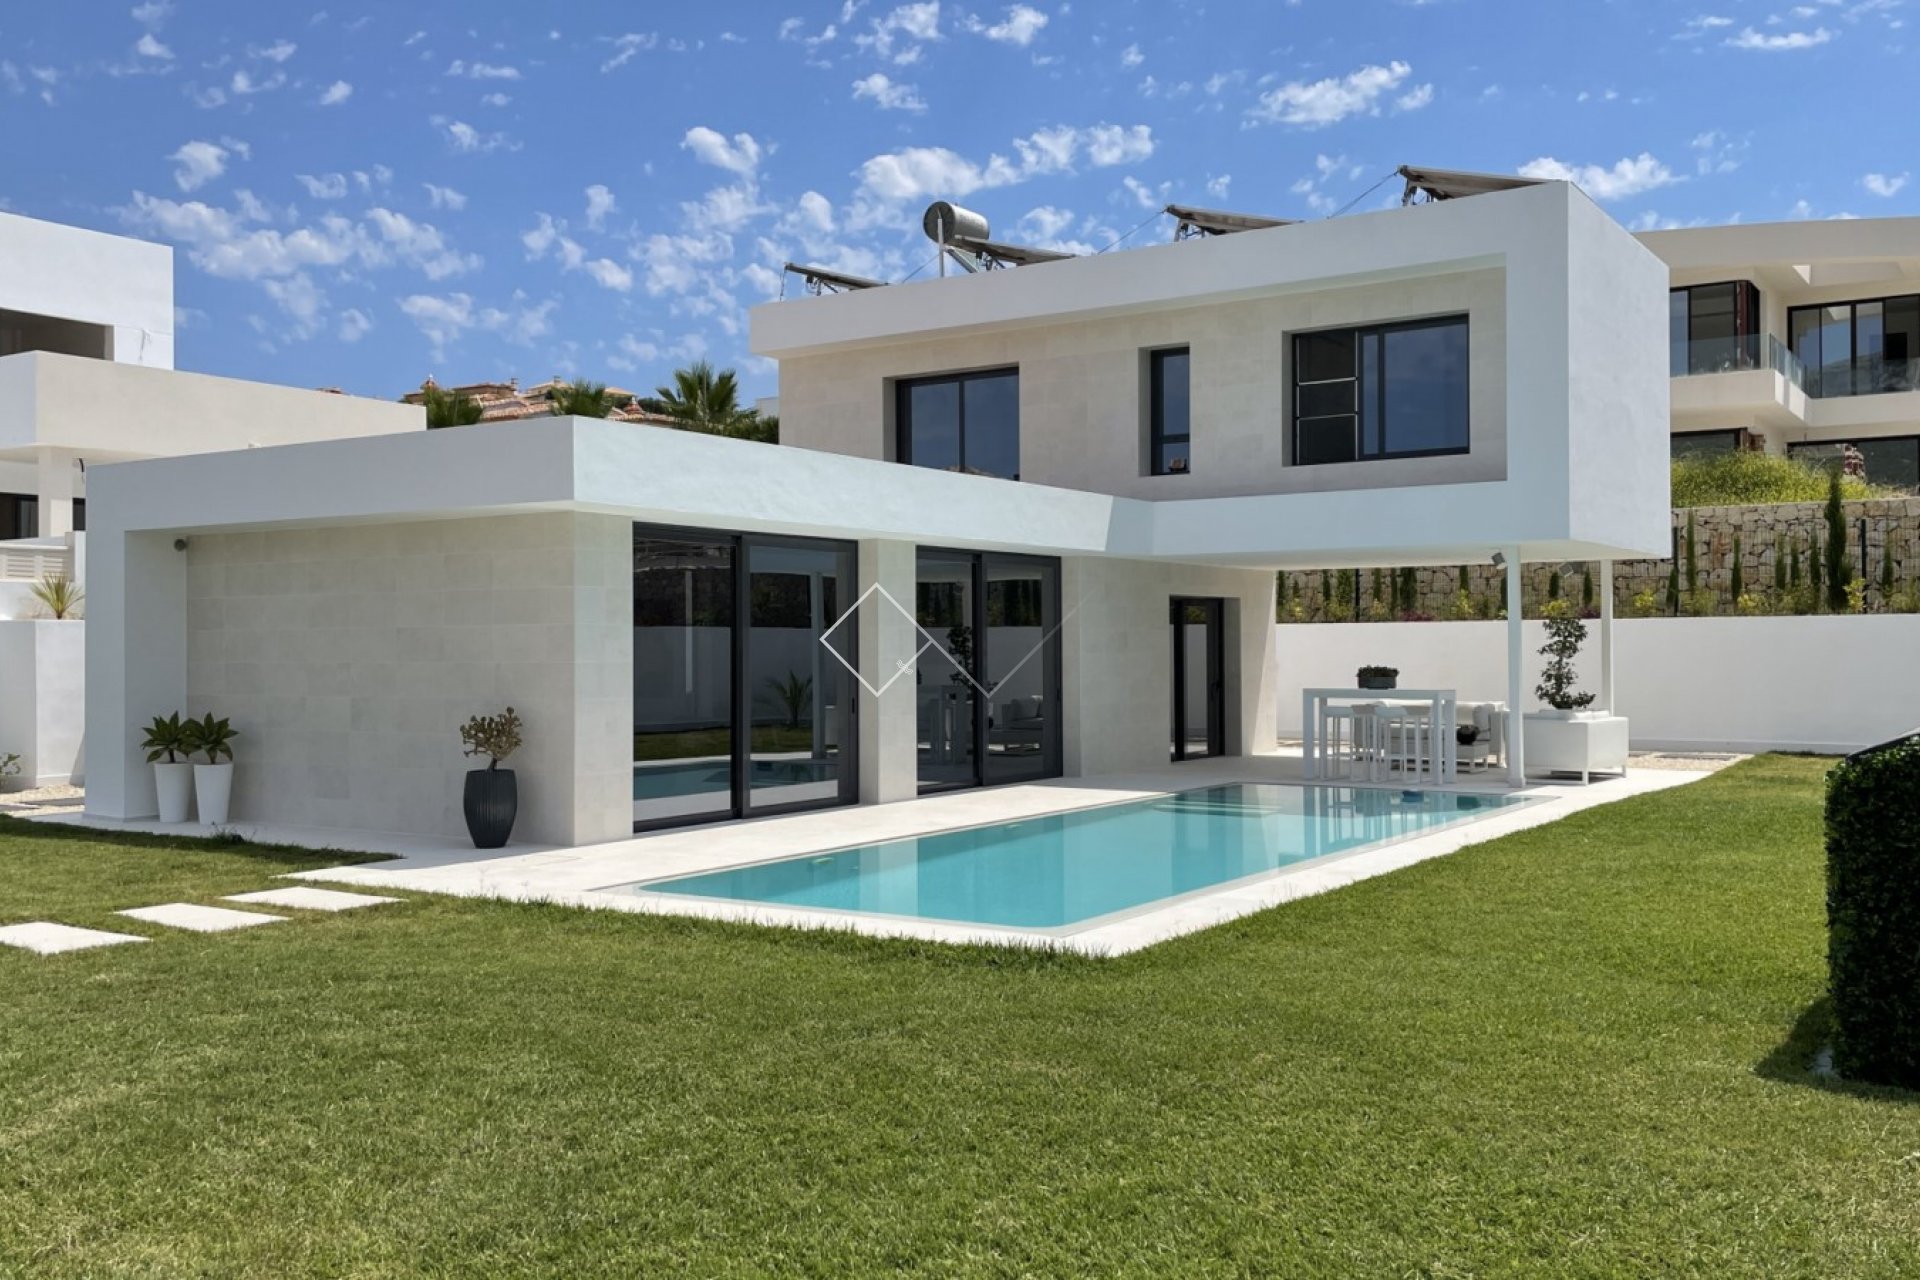 Modern villa for sale close to beach and centre of Calpe